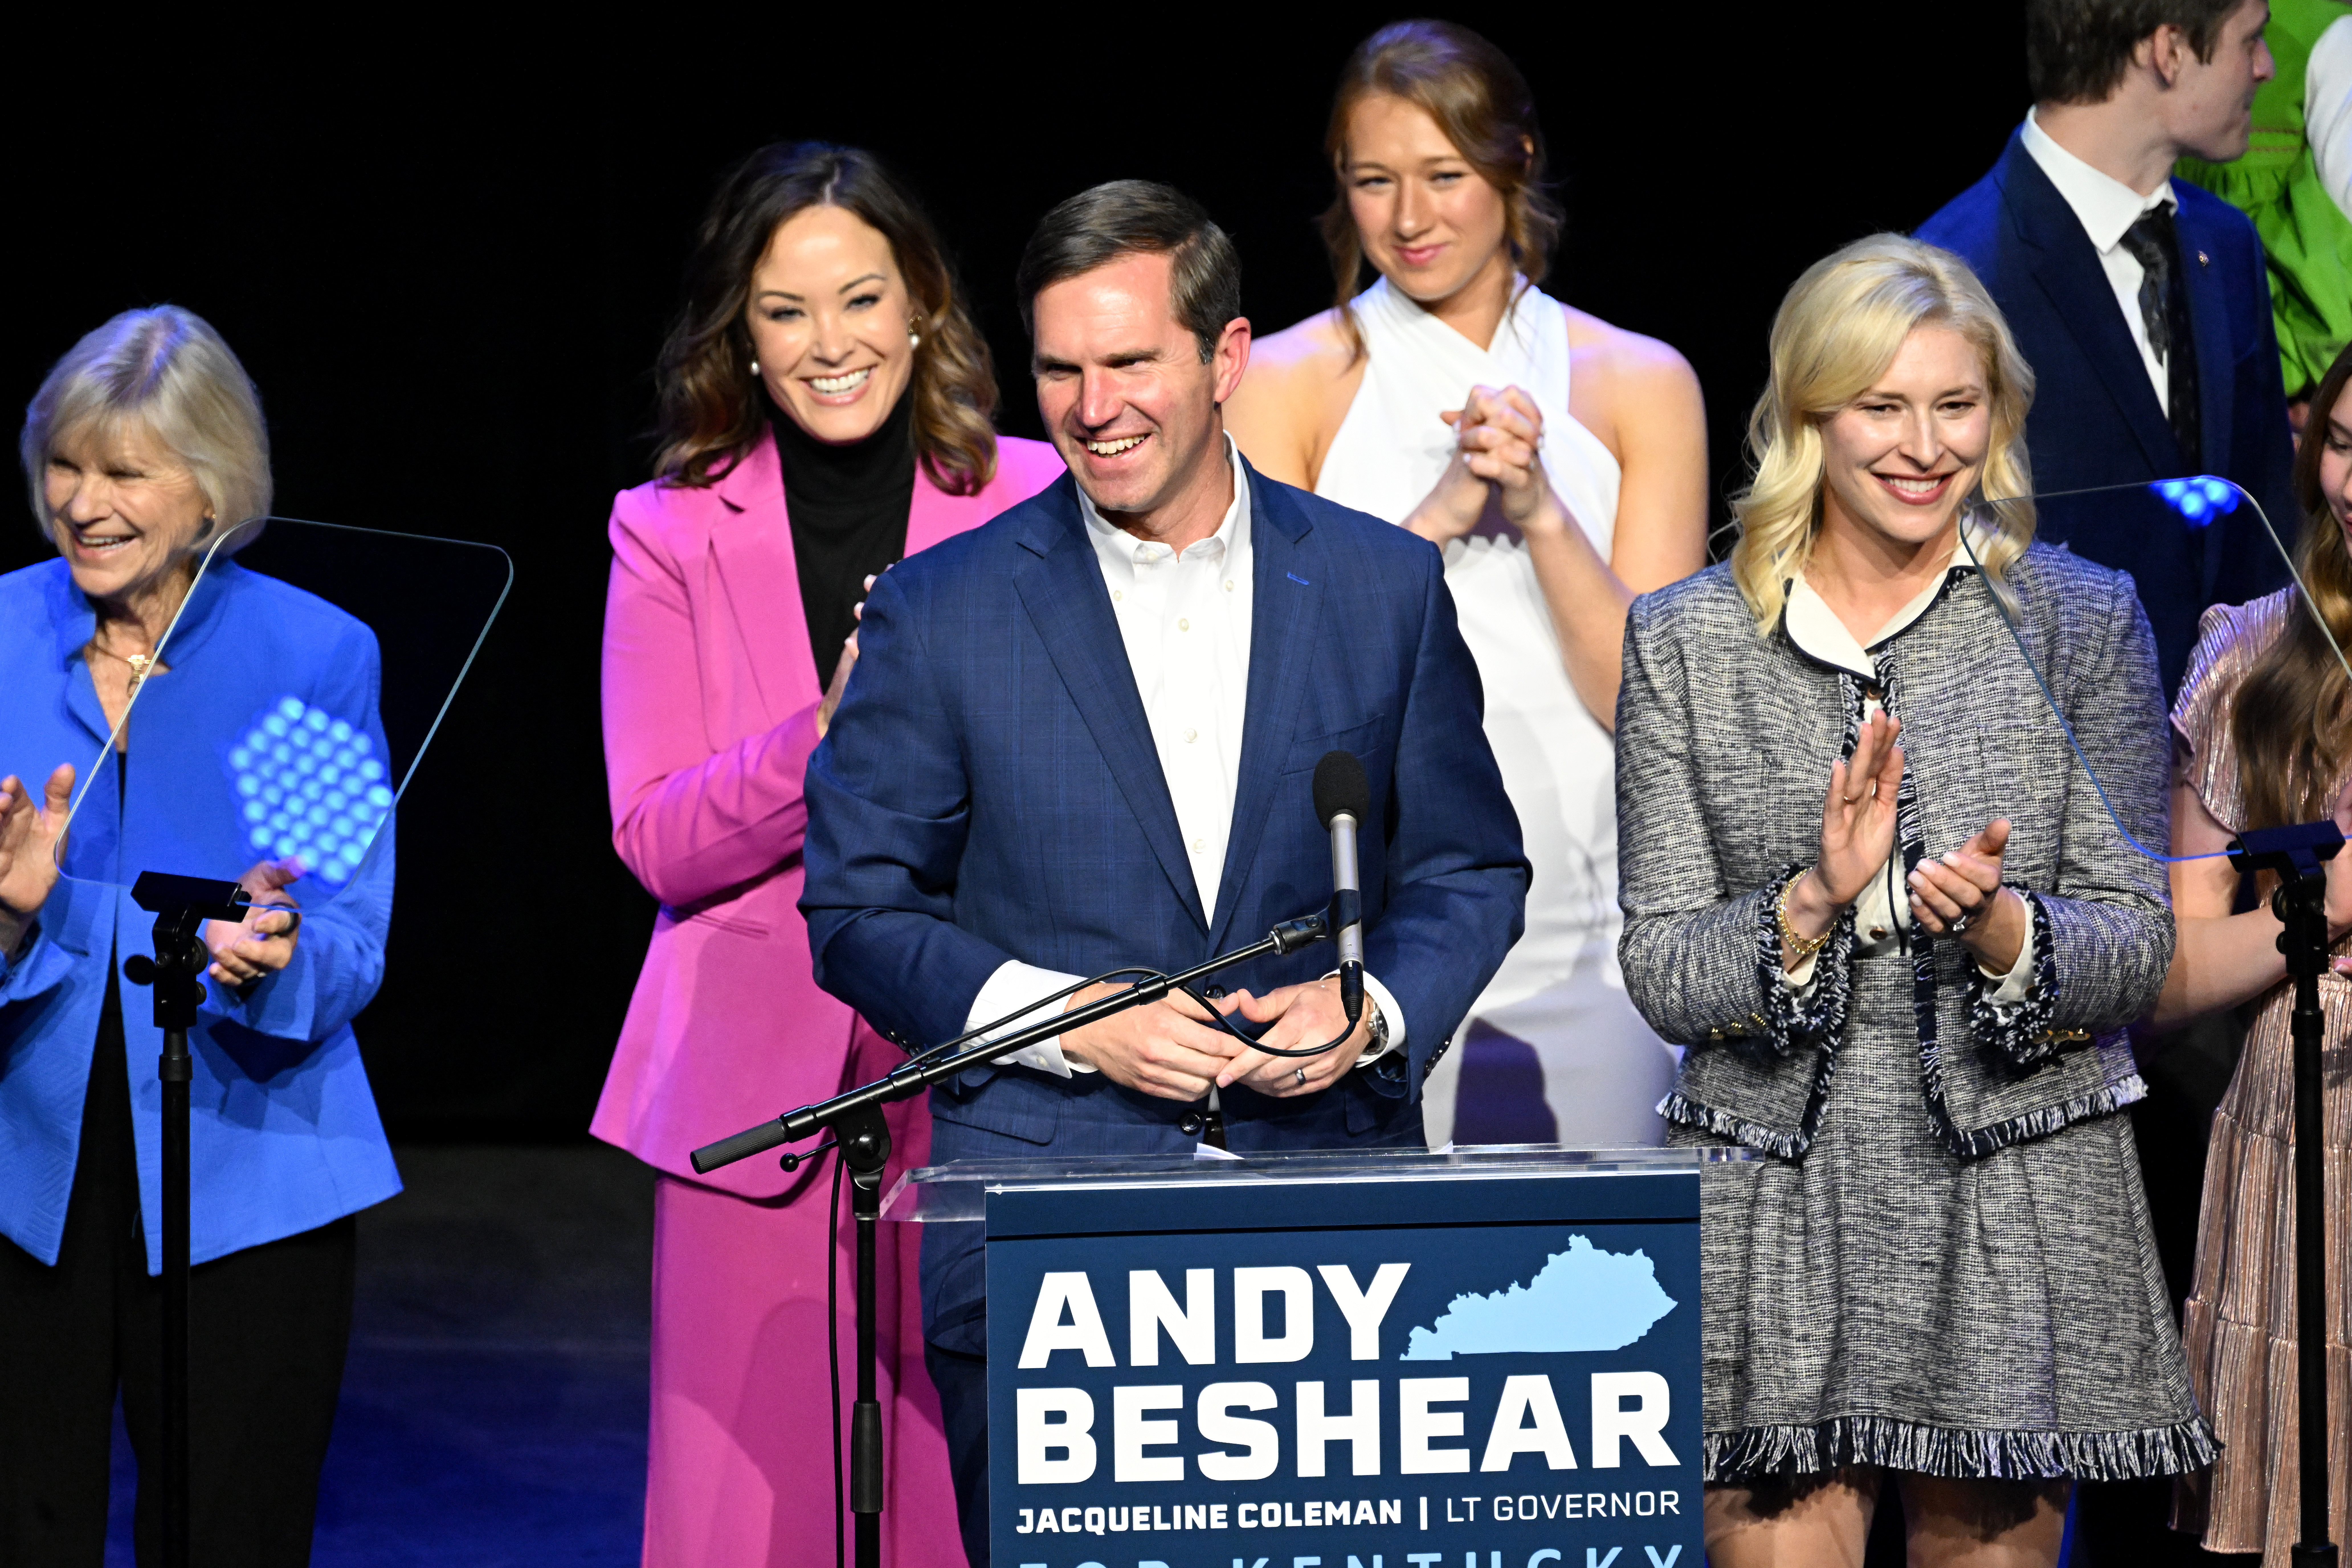 LOUISVILLE, KENTUCKY - NOVEMBER 07: Kentucky incumbent Democratic Gov. Andy Beshear is joined by his wife, Britainy Beshear (R), Kentucky Lt. Governor Jacqueline Coleman (C-L) and his family as he delivers his victory speech to a crowd at an election night event at Old Forrester's Paristown Hall on November 7, 2023 in Louisville, Kentucky. Beshear successfully defeated Republican challenger Kentucky Attorney General Daniel Cameron and will serve a second term as governor. (Photo by Stephen Cohen/Getty Images)